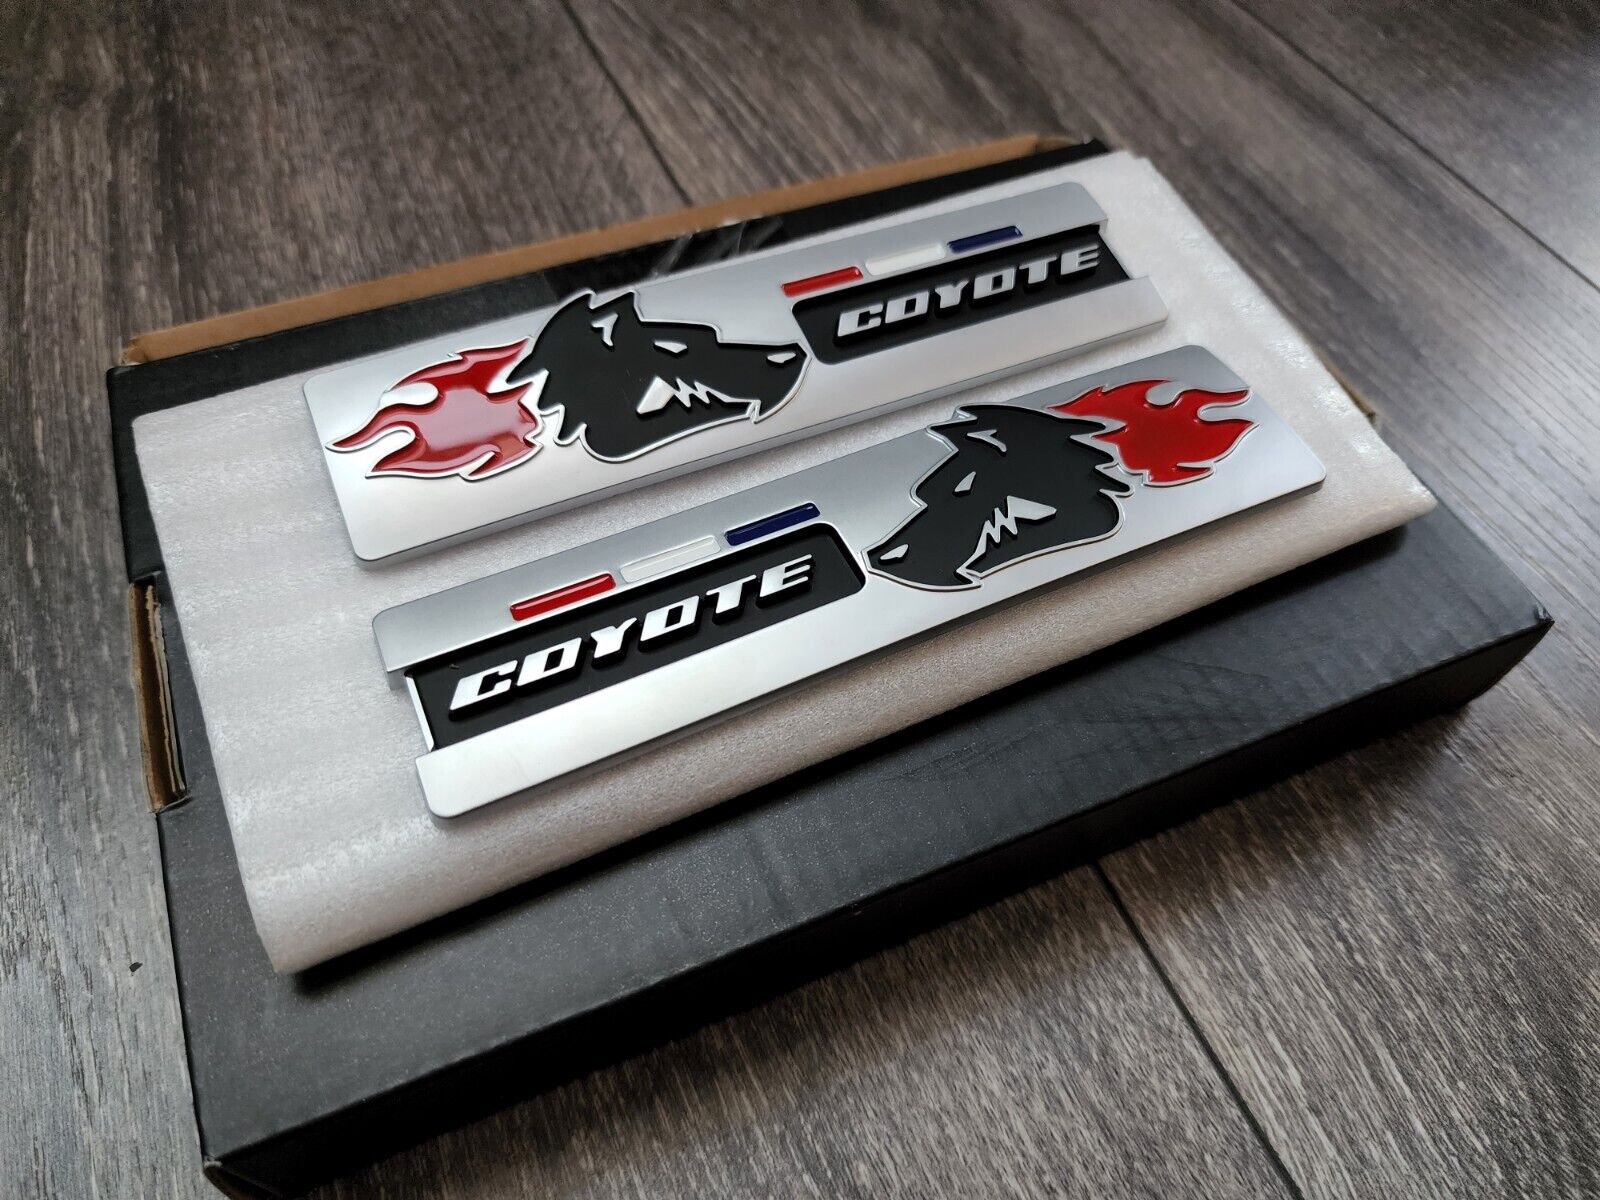 Super Coyote 5.0 GT Ford Mustang Side Fender Emblem Badge Decal (Pair)